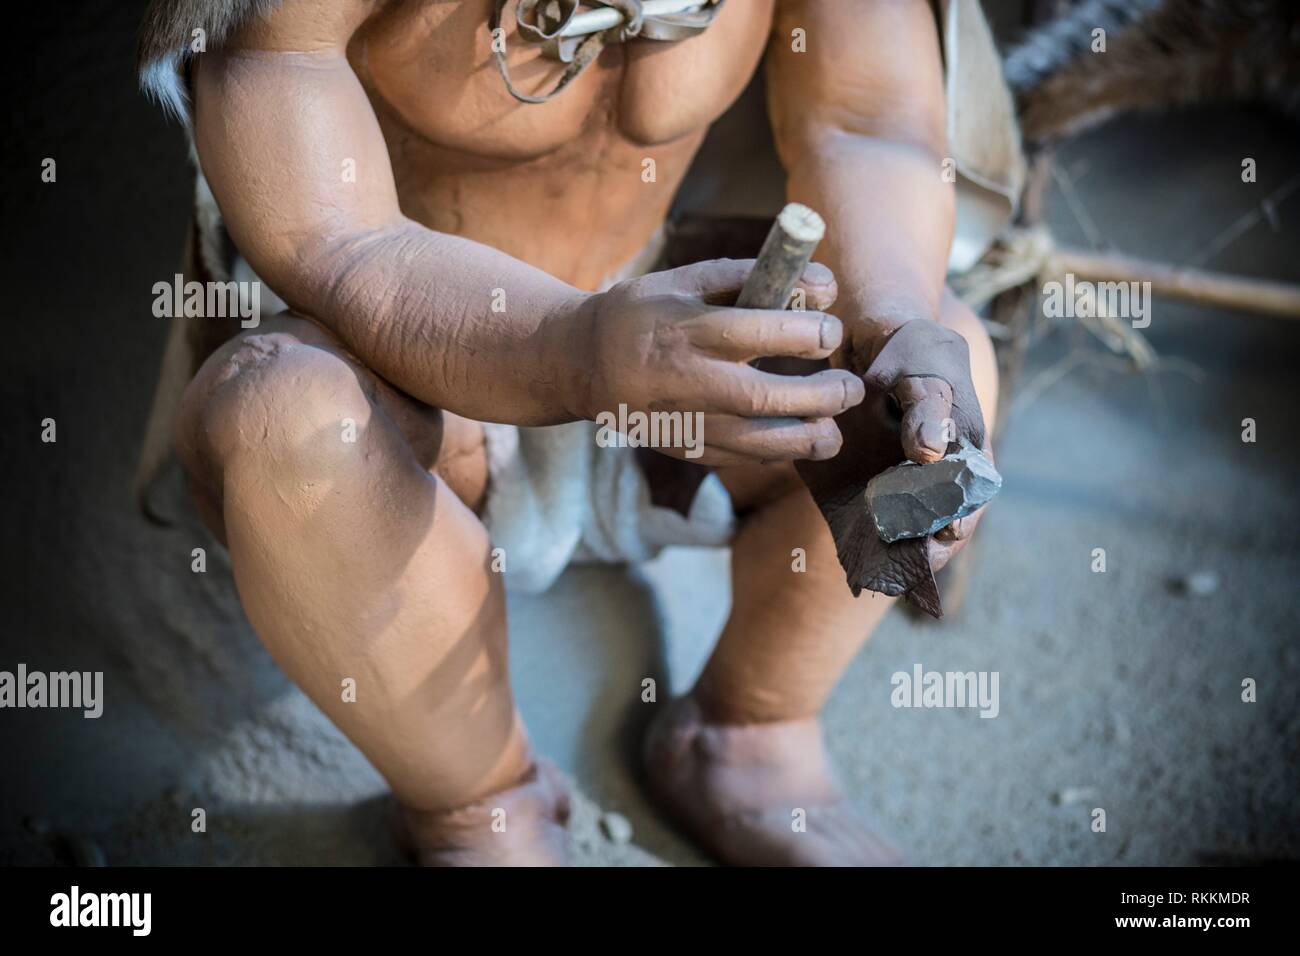 Life-sized sculpture of prehistoric man creating lithic tool Stock Photo